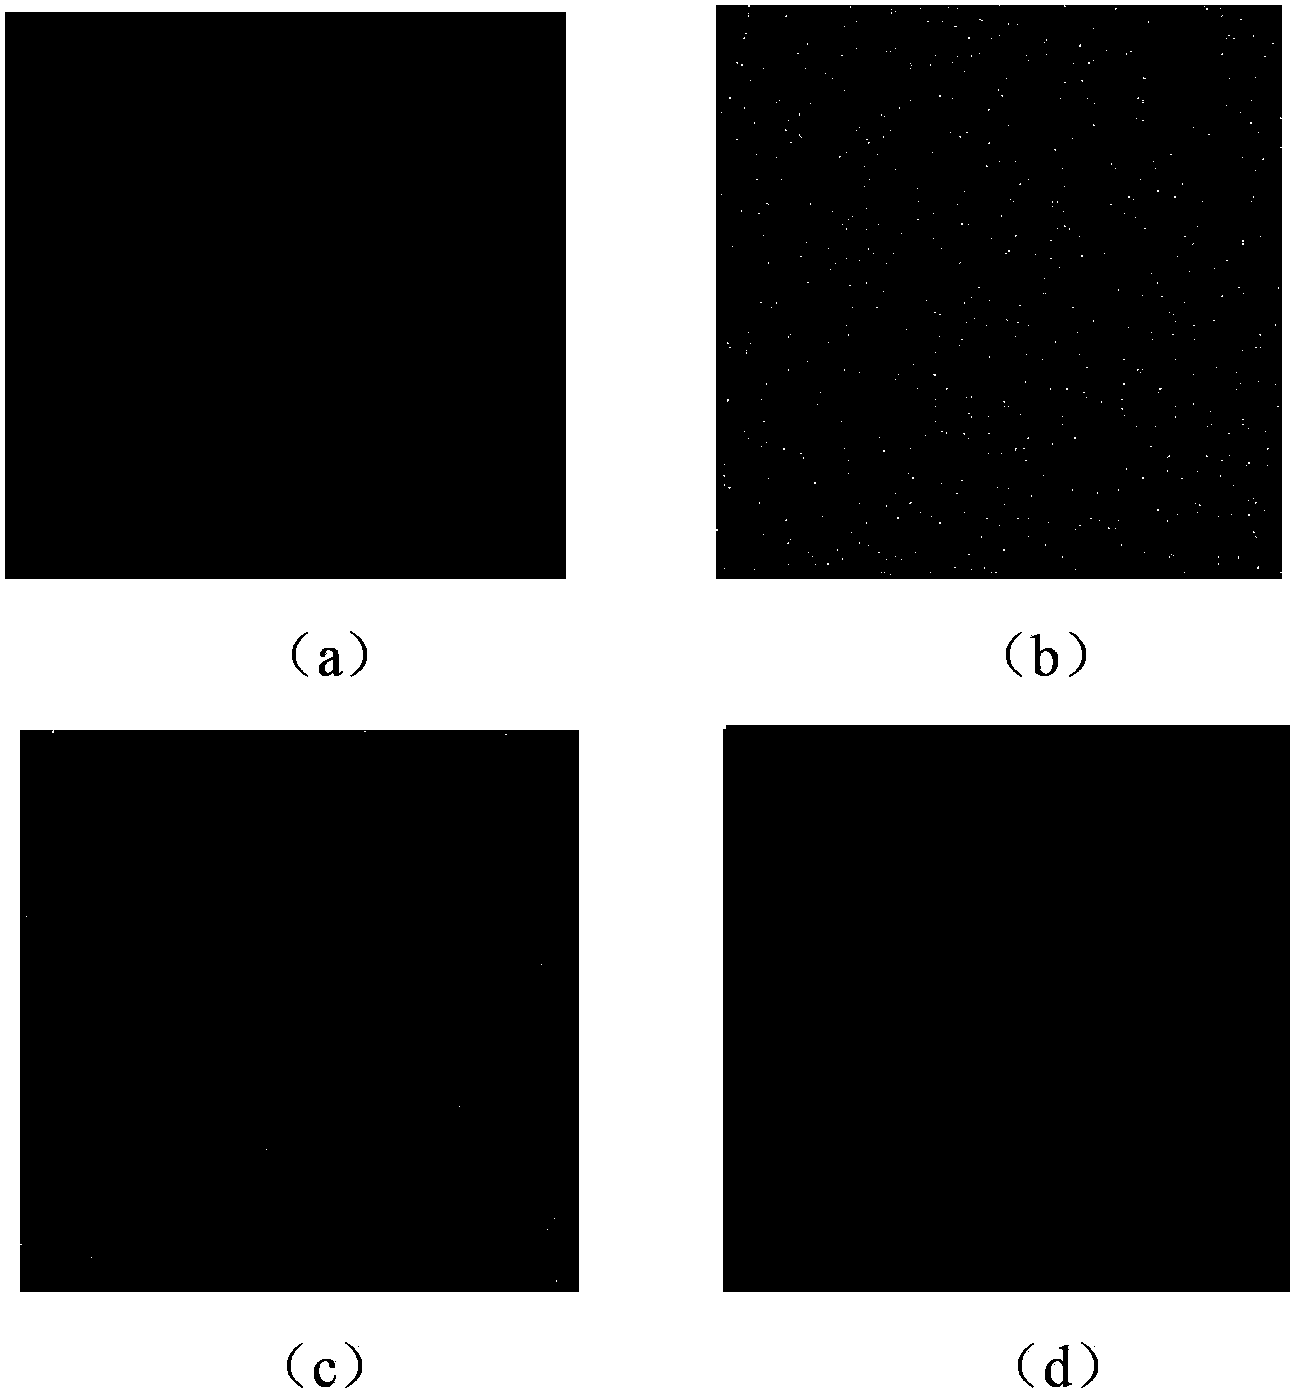 Non-local mean filtering method based on direction field estimation